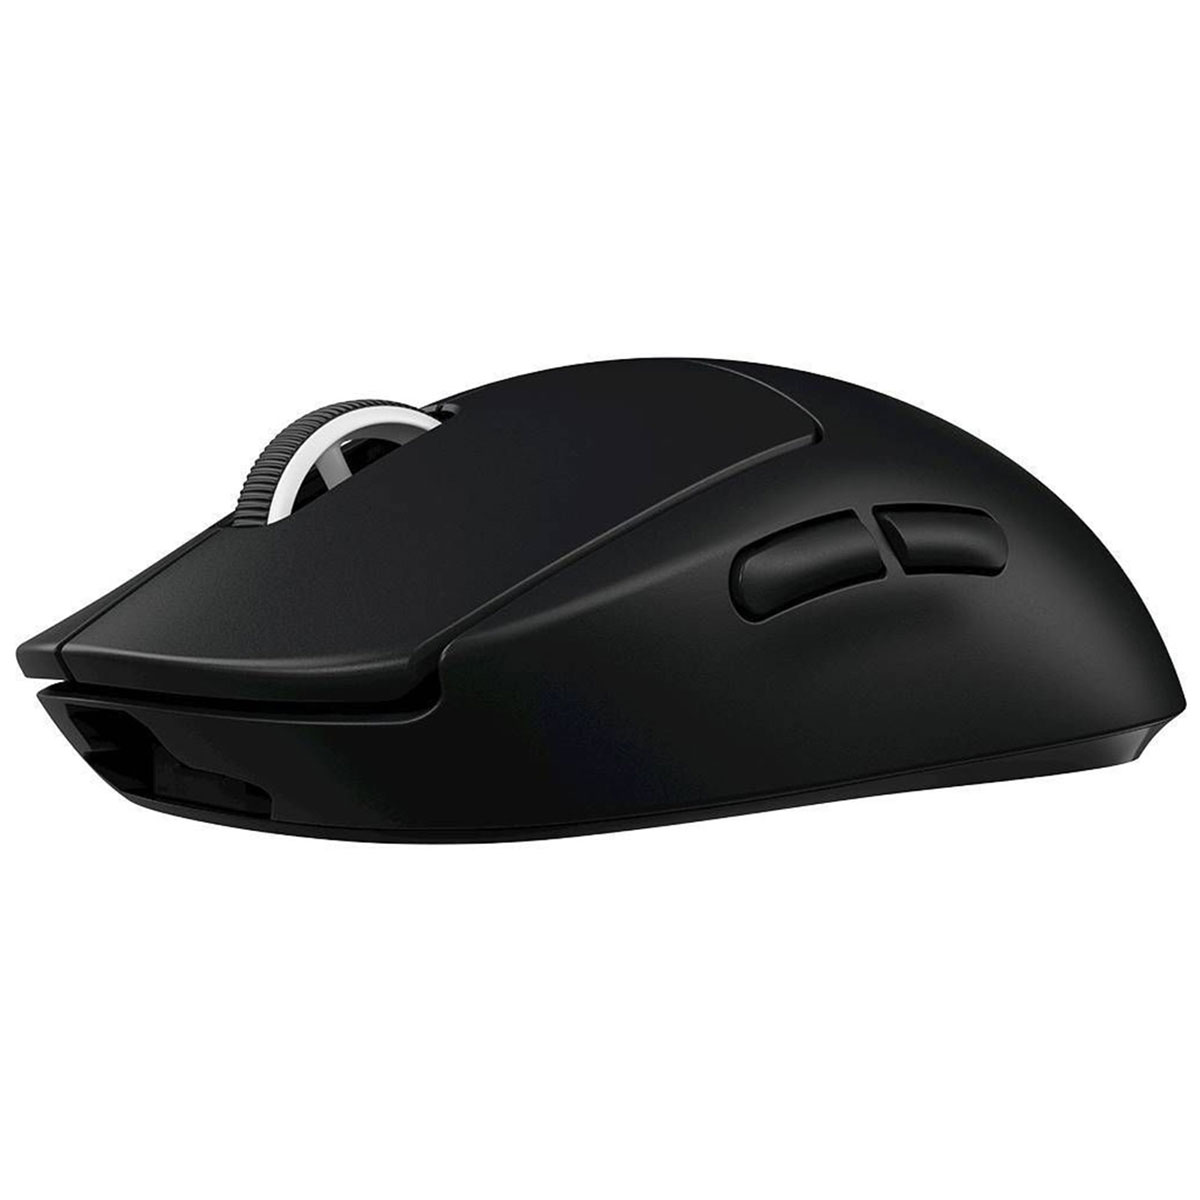 PRO Wireless Gaming Mouse